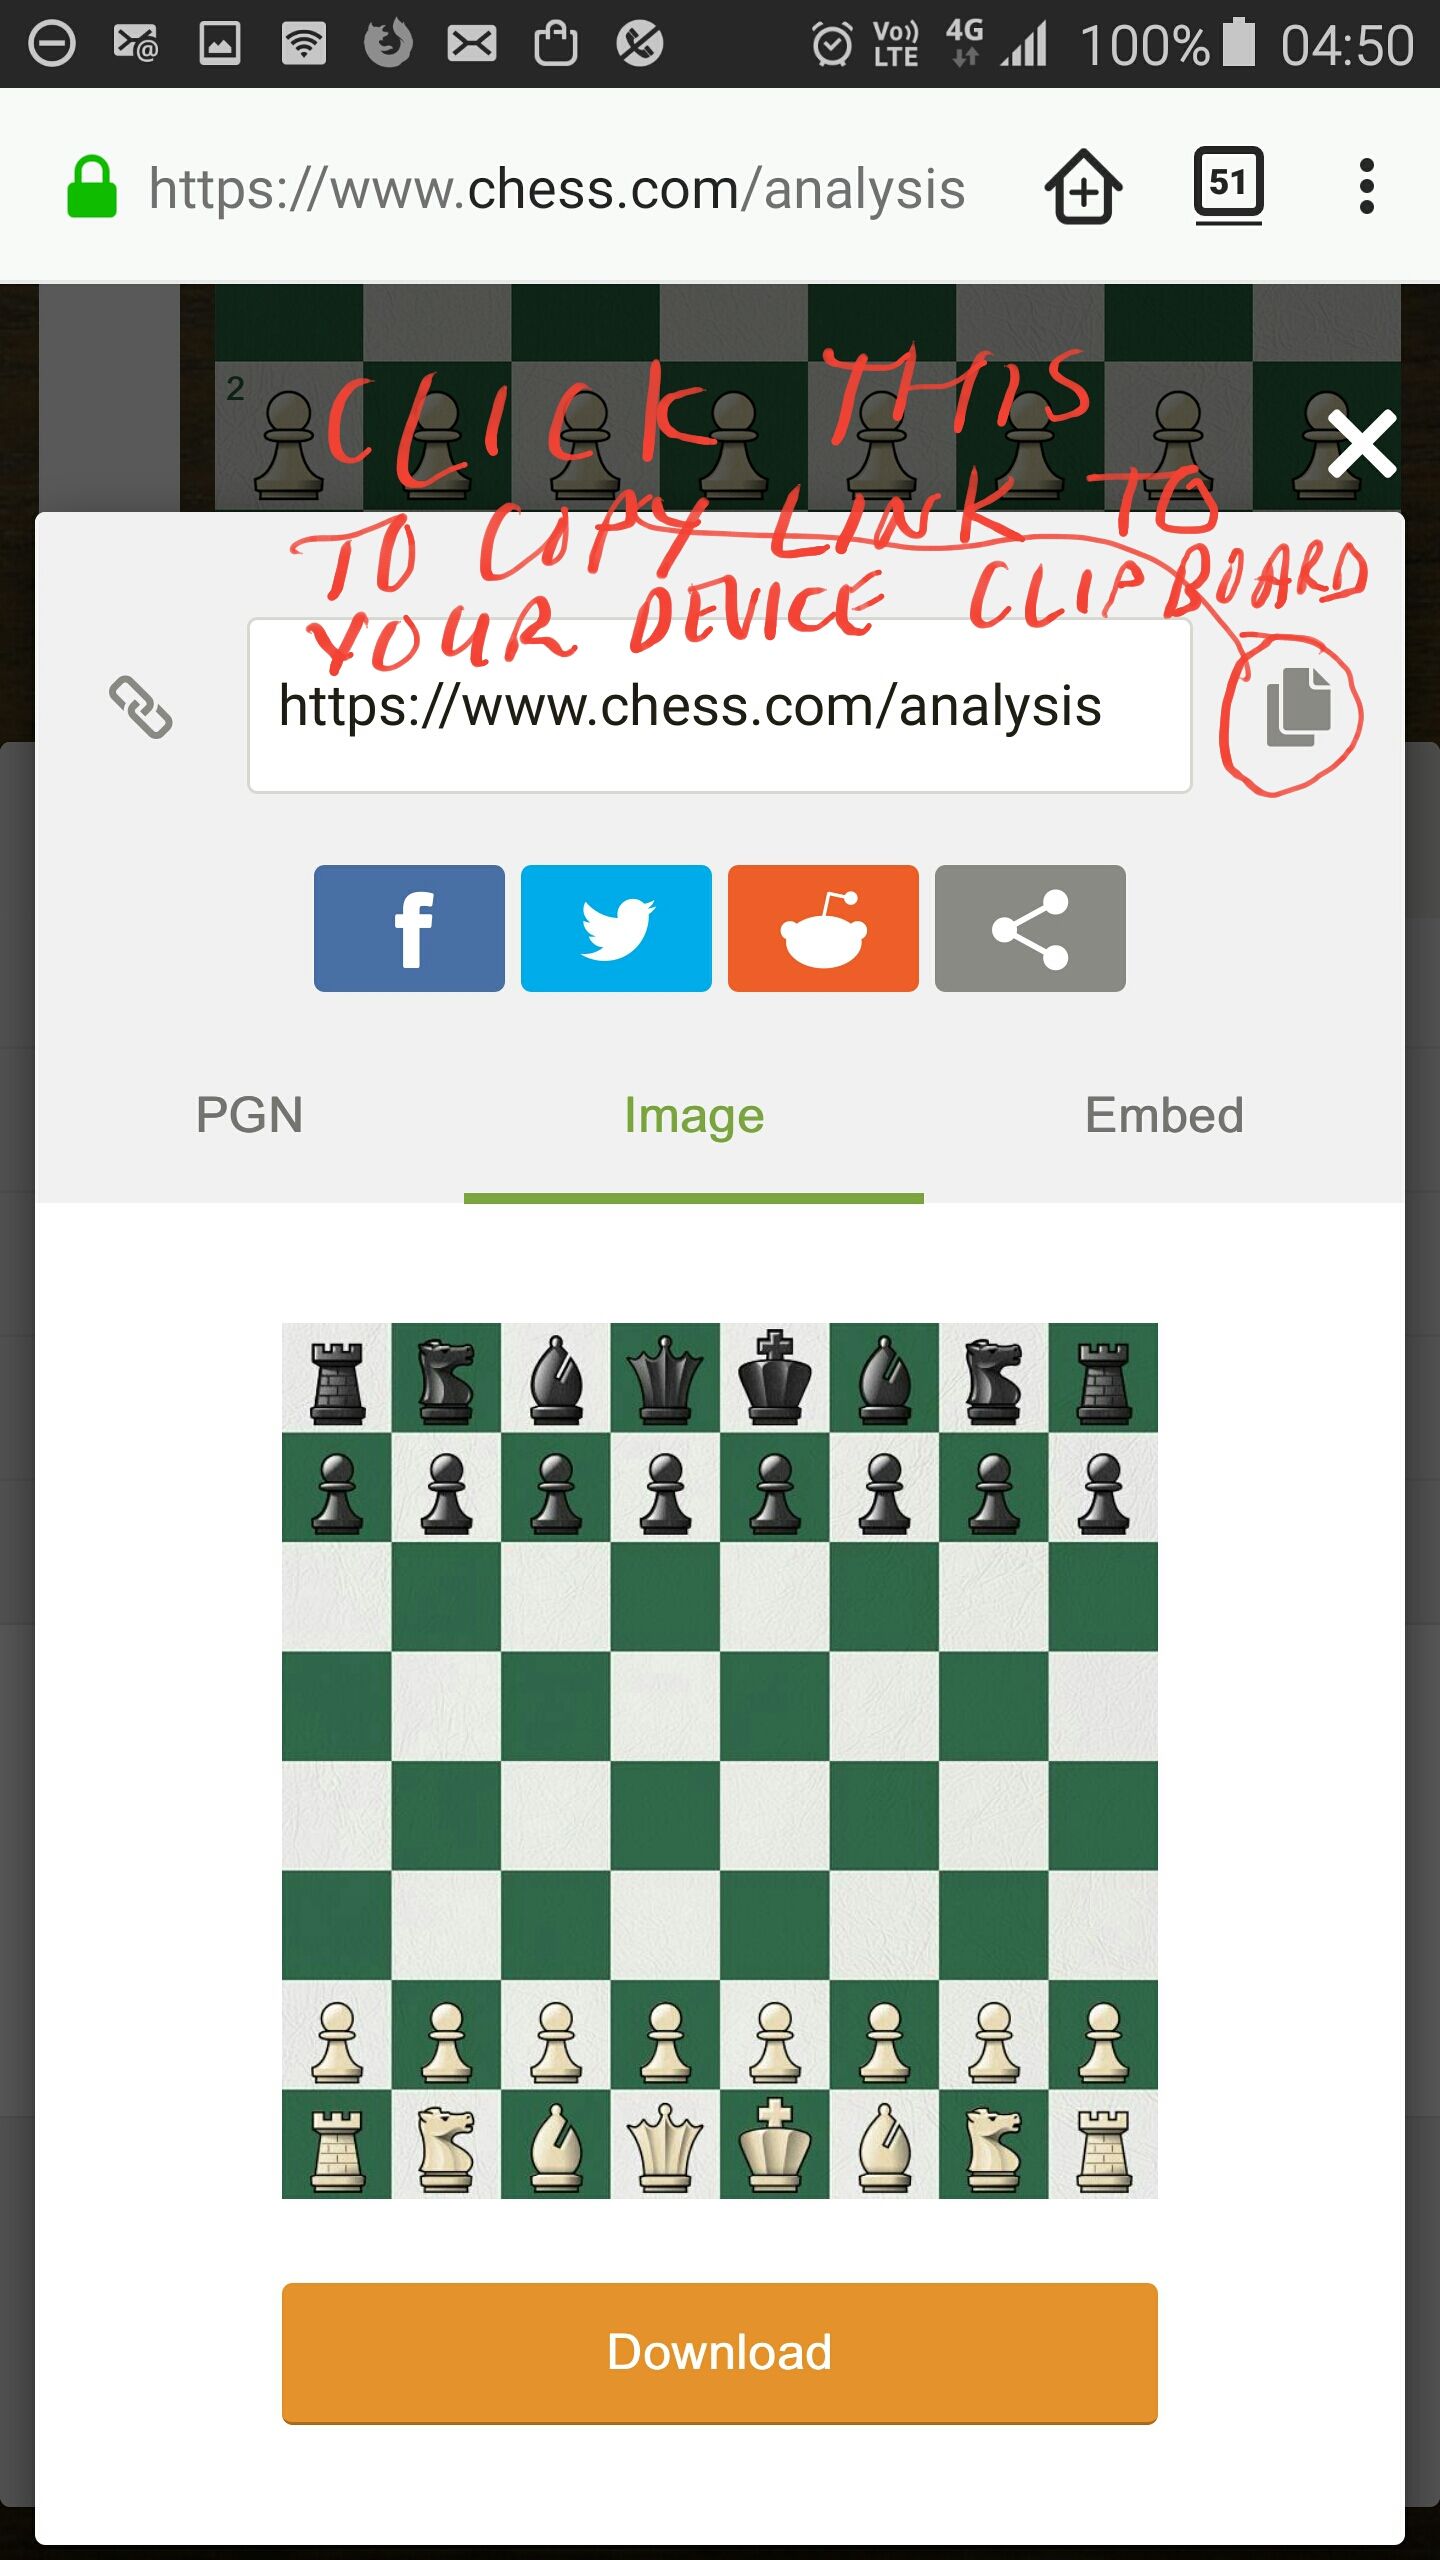 Crazy House PGN / Analysis flip board - Chess Forums 